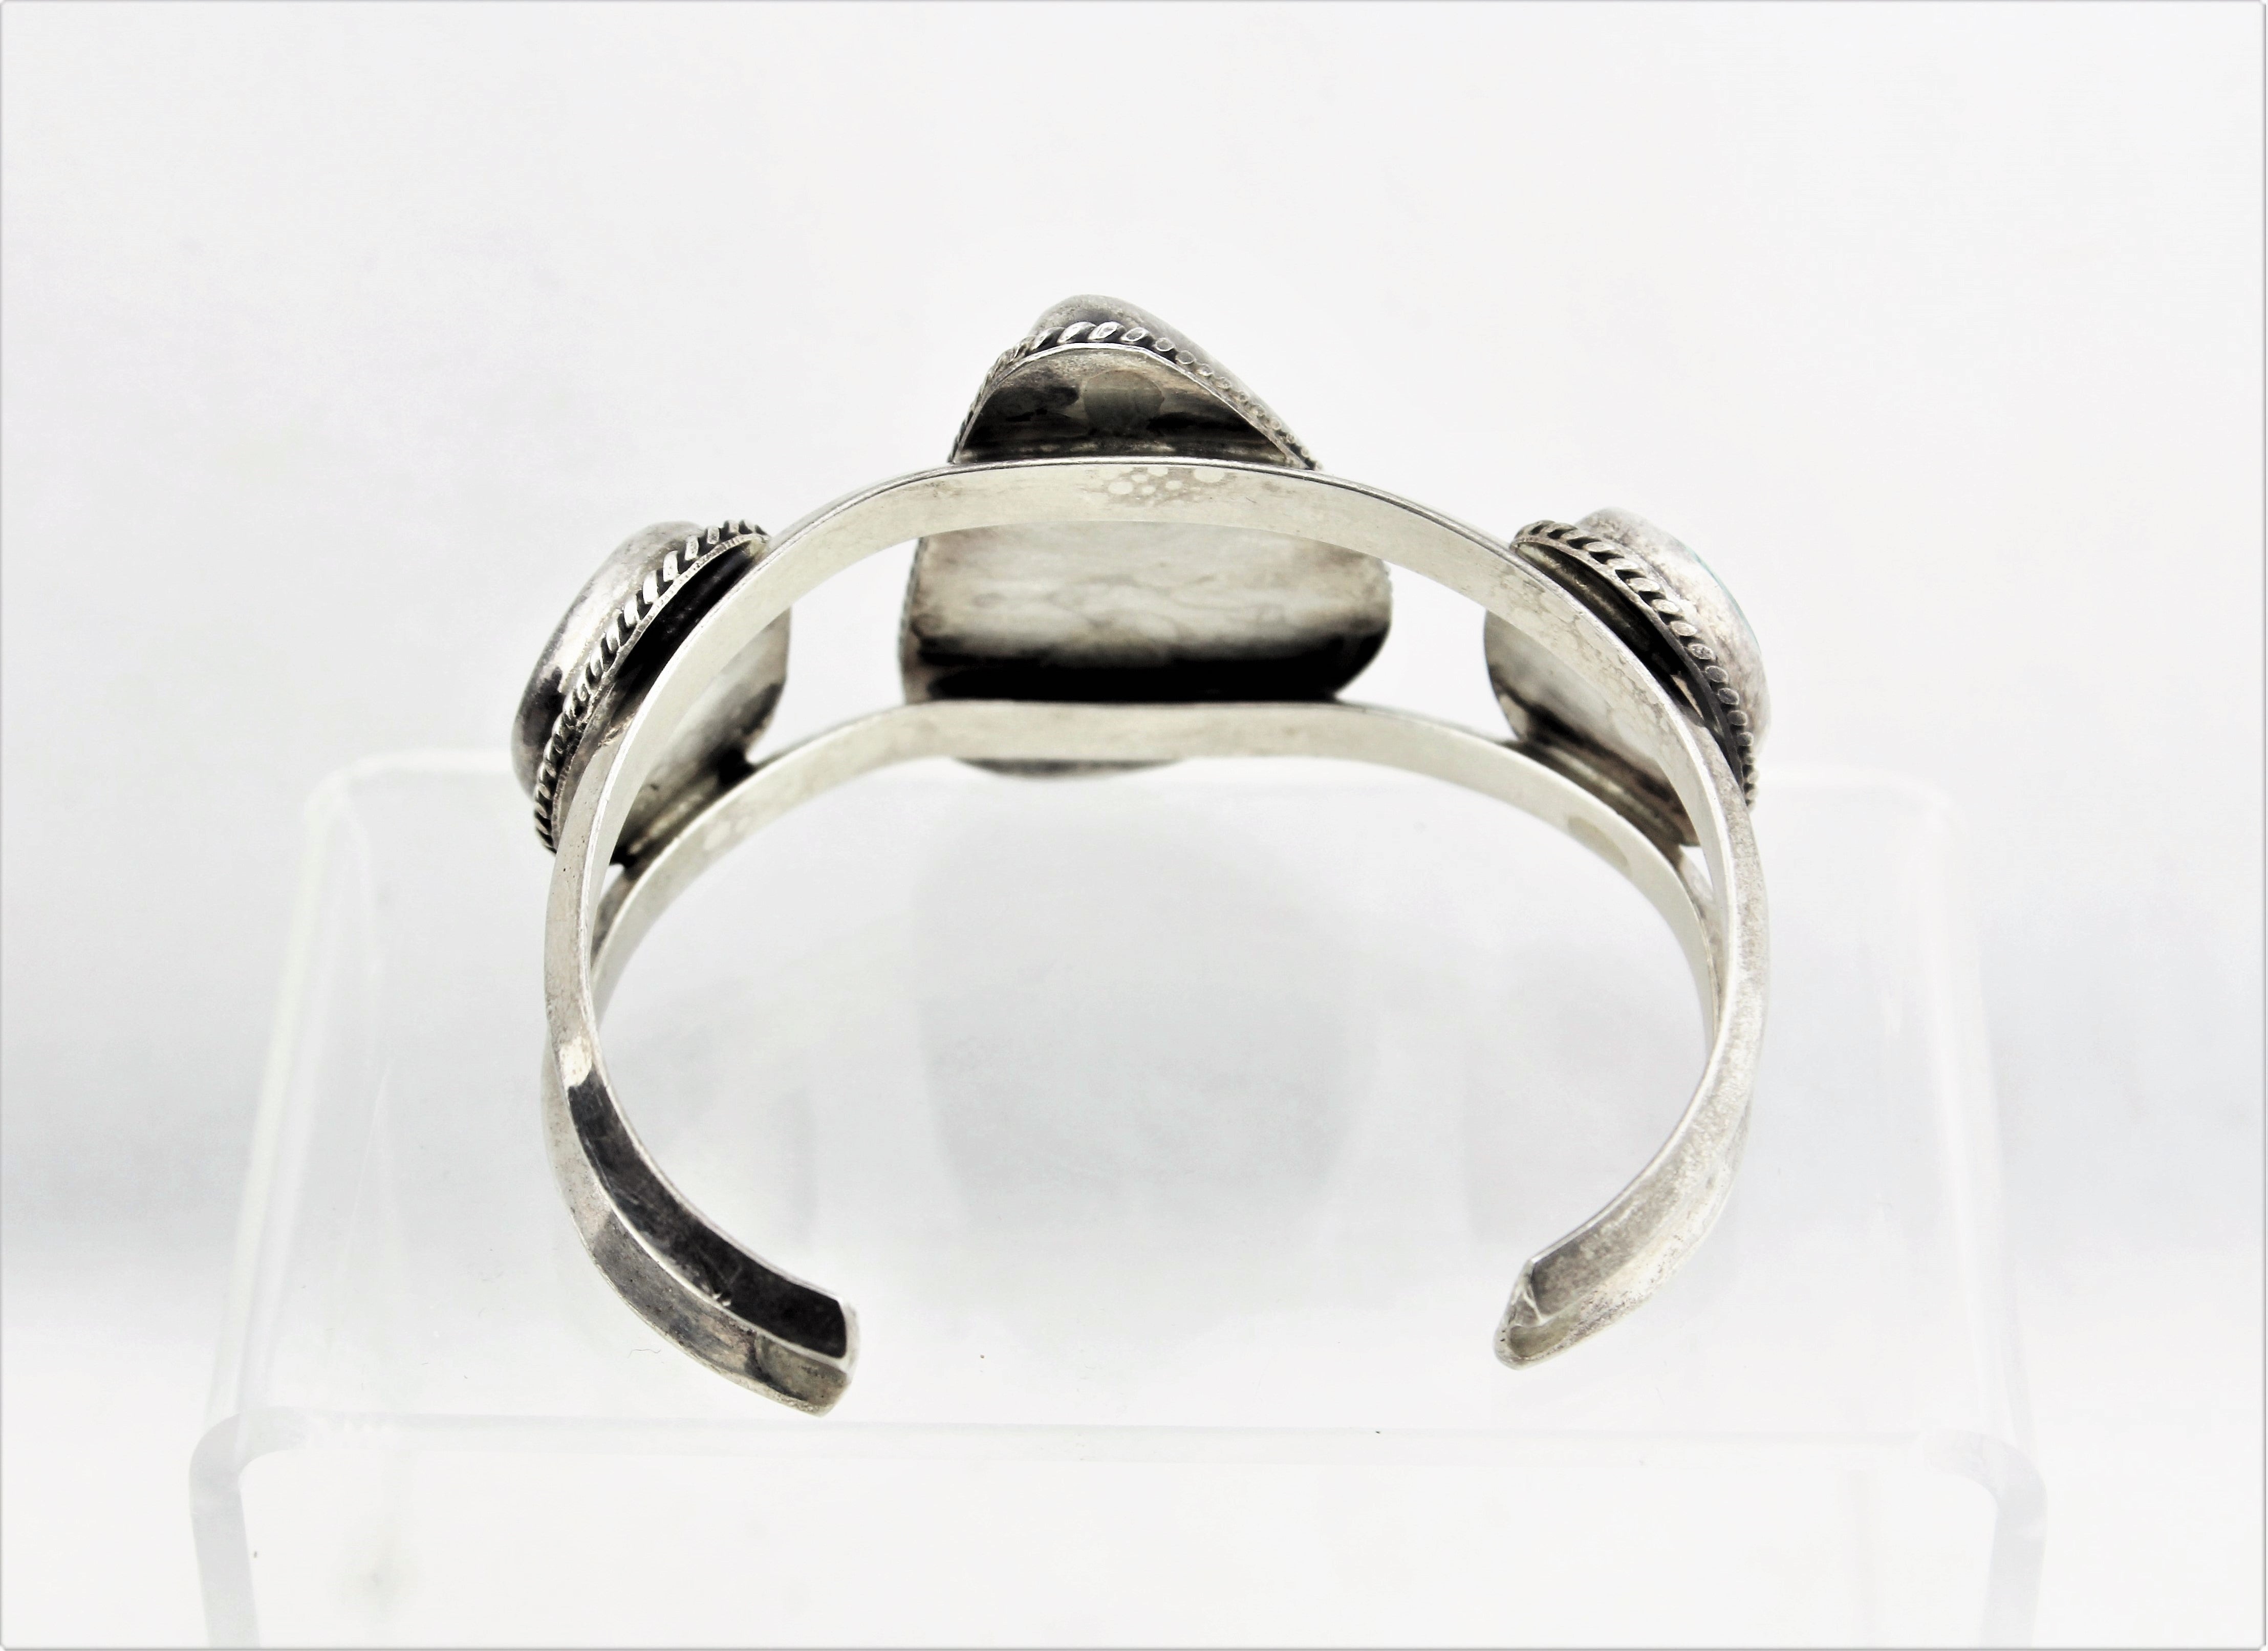 Native American Bracelet and Ring Set